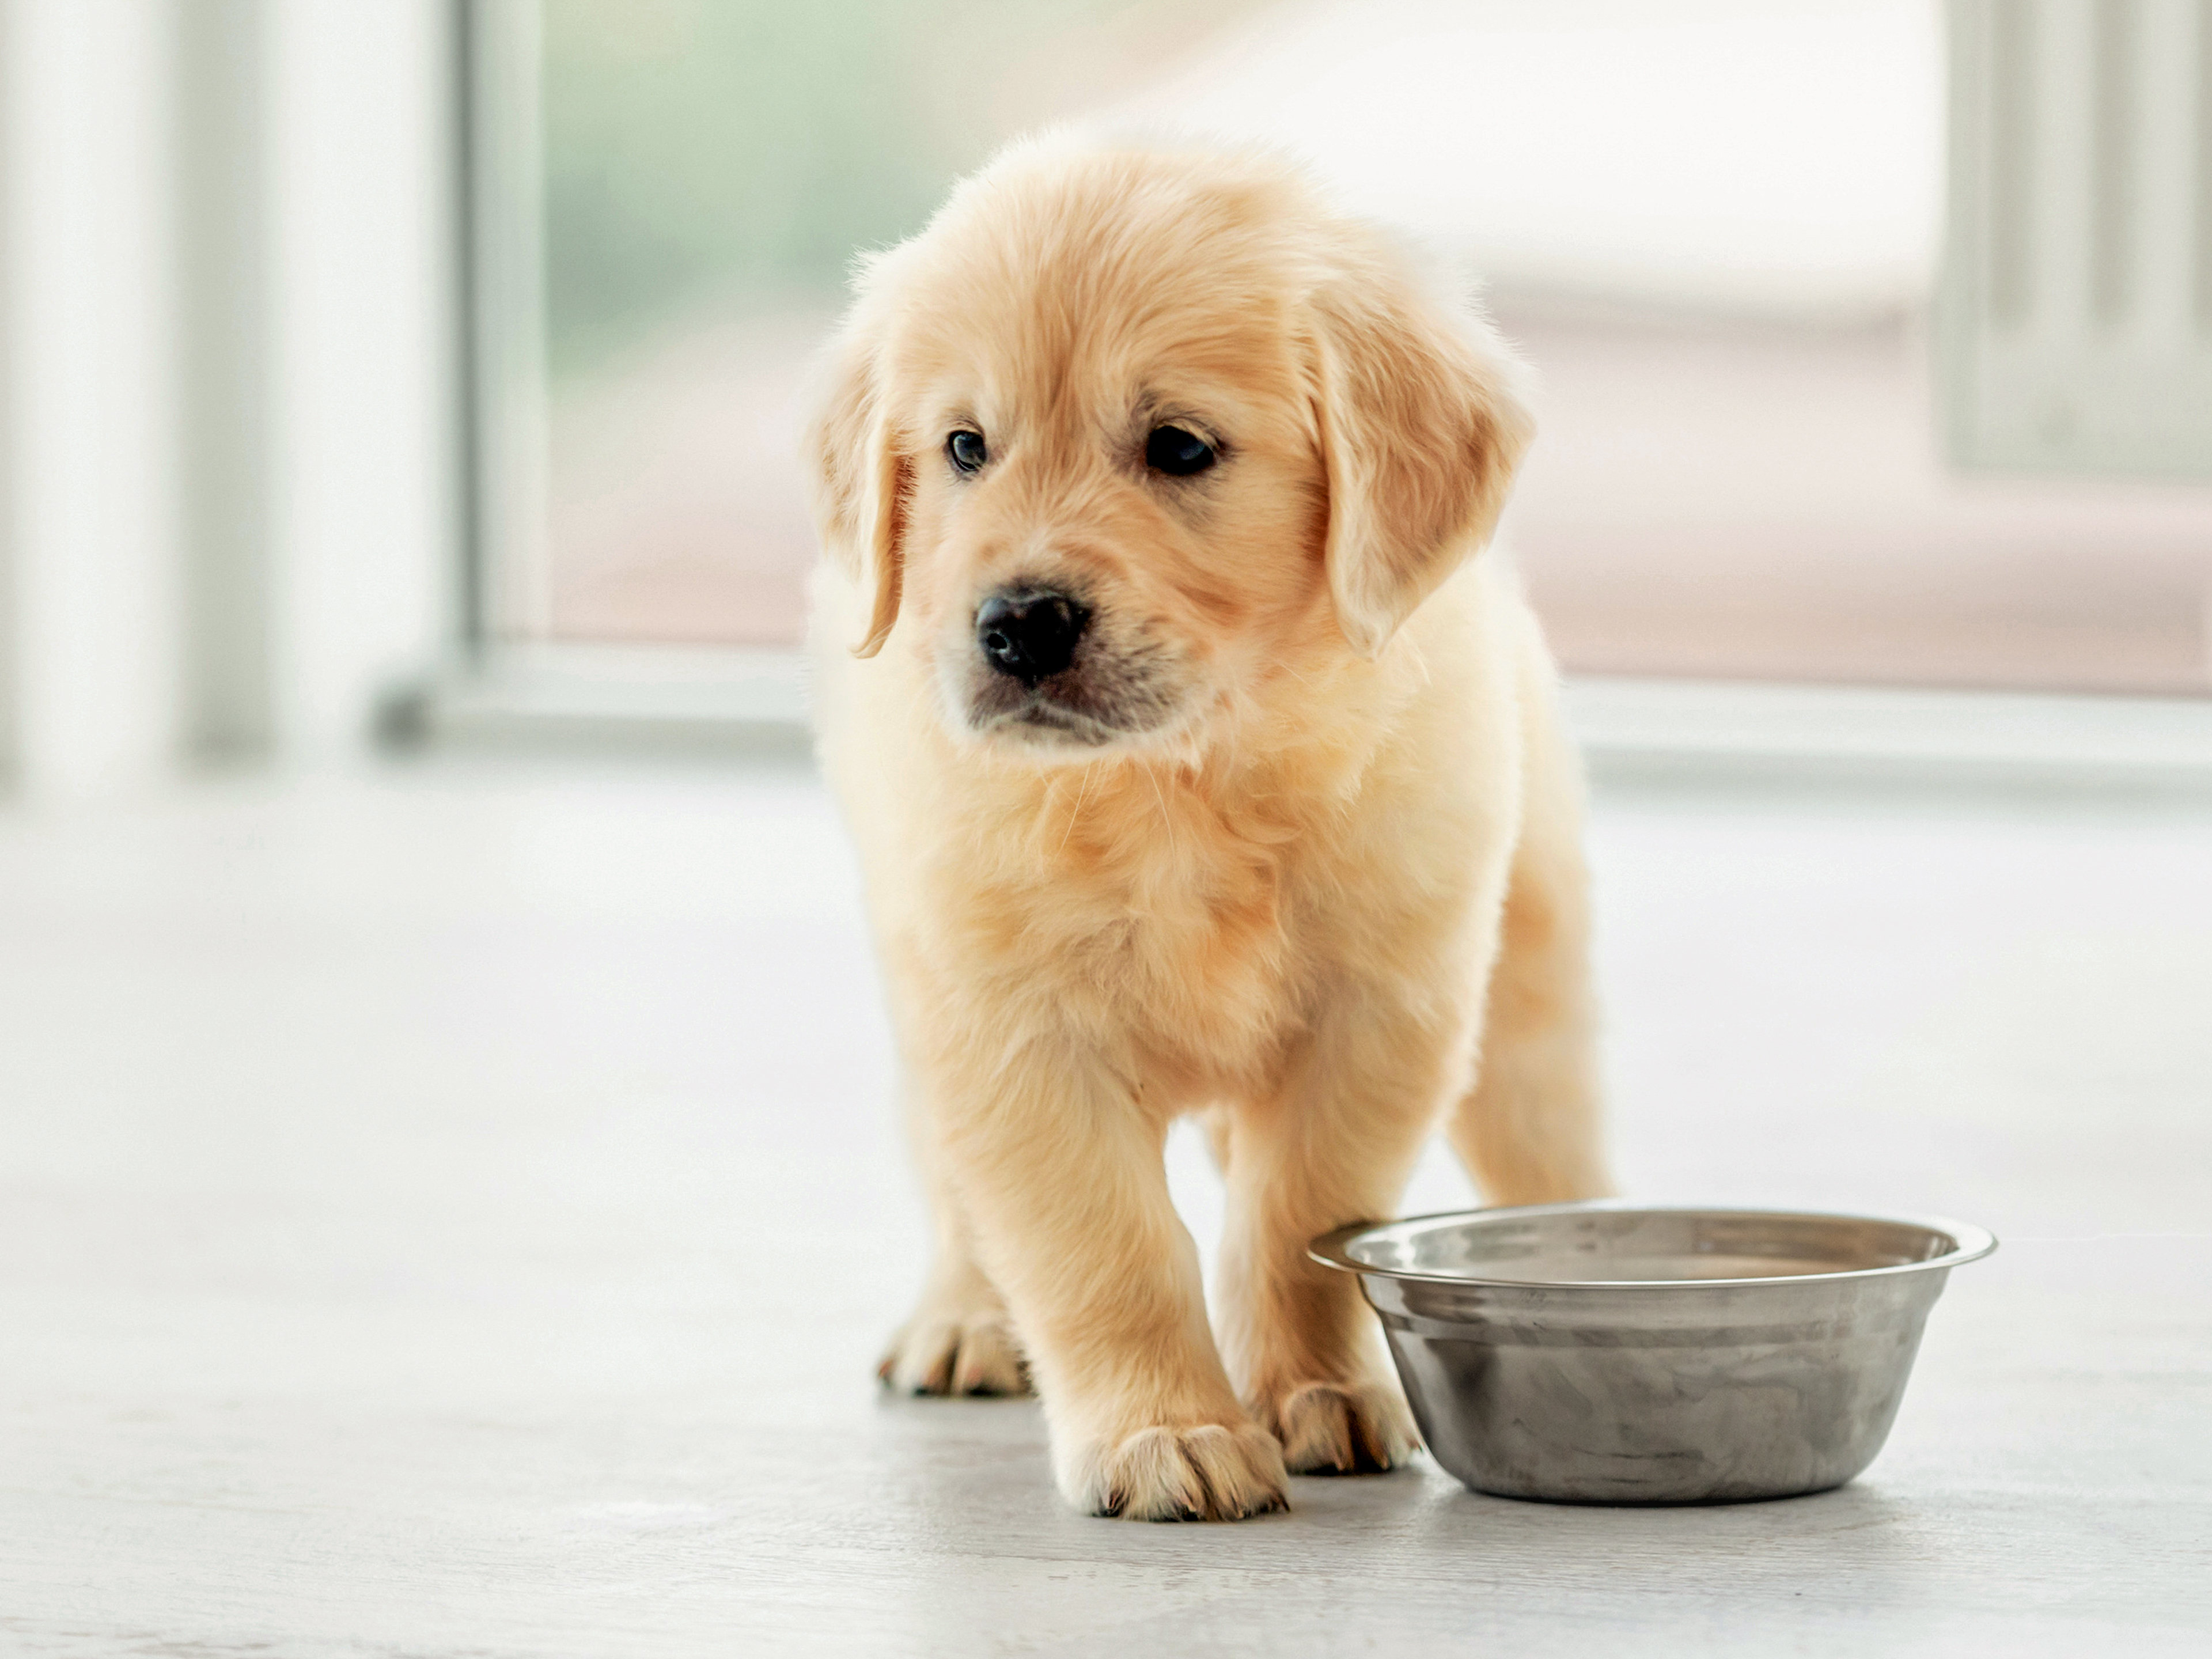 Golden Retriever puppy standing indoors next to a stainless steel feeding bowl